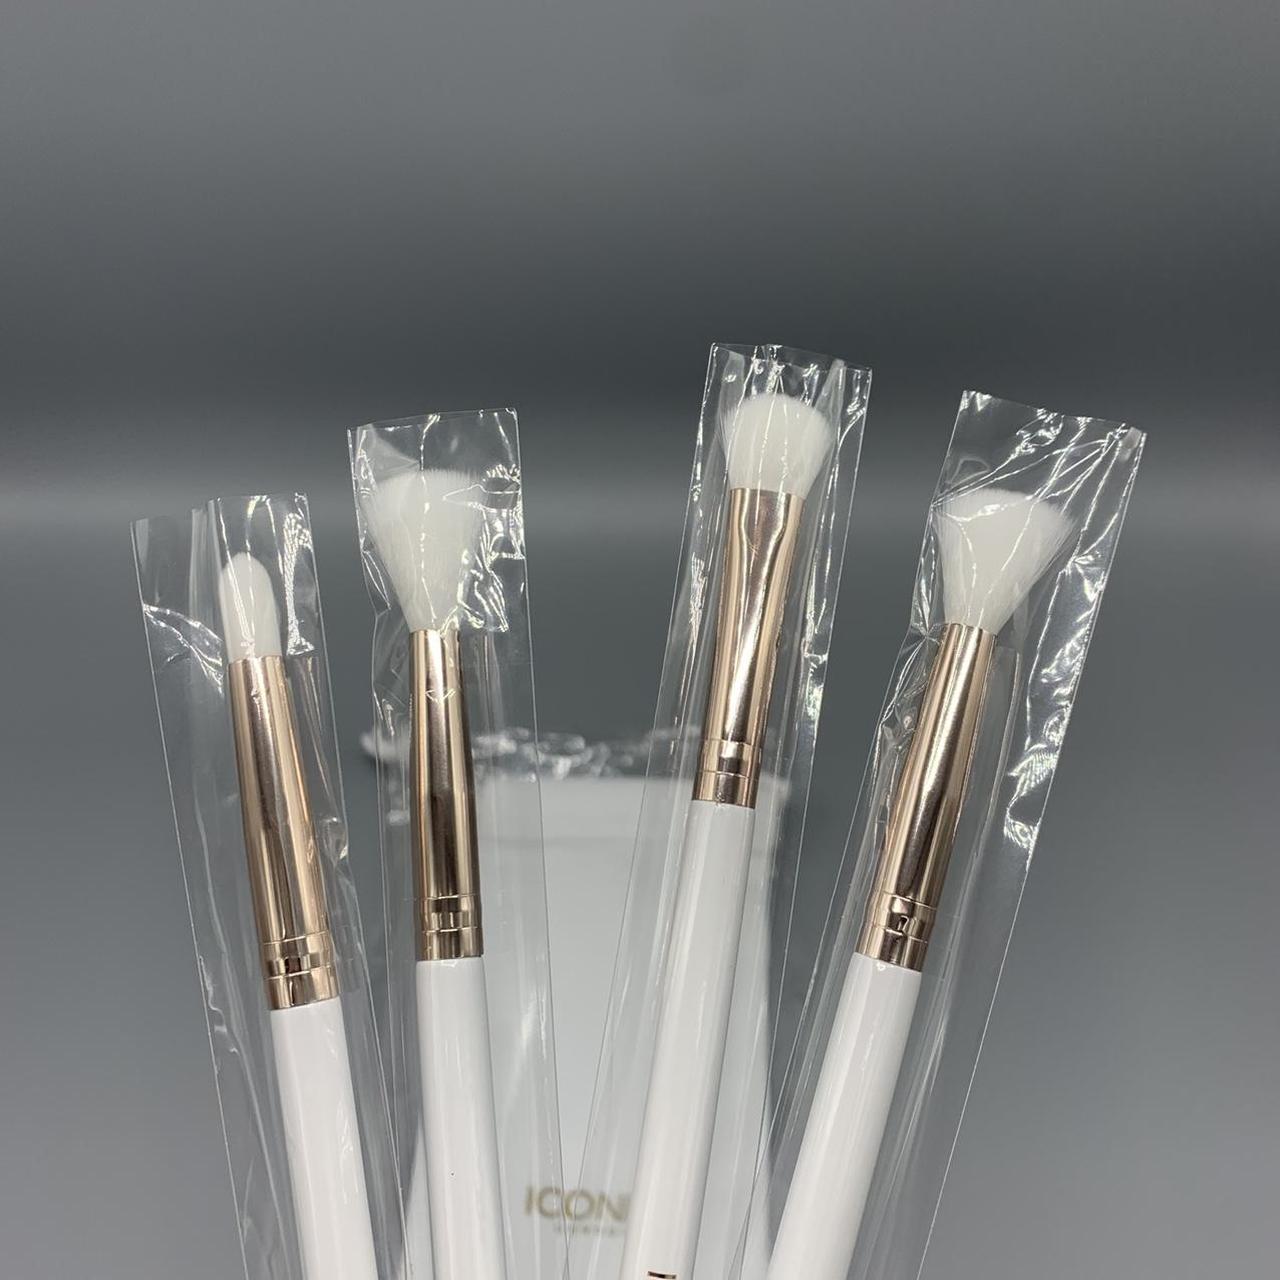 Iconic London White Tools-and-brushes (2)